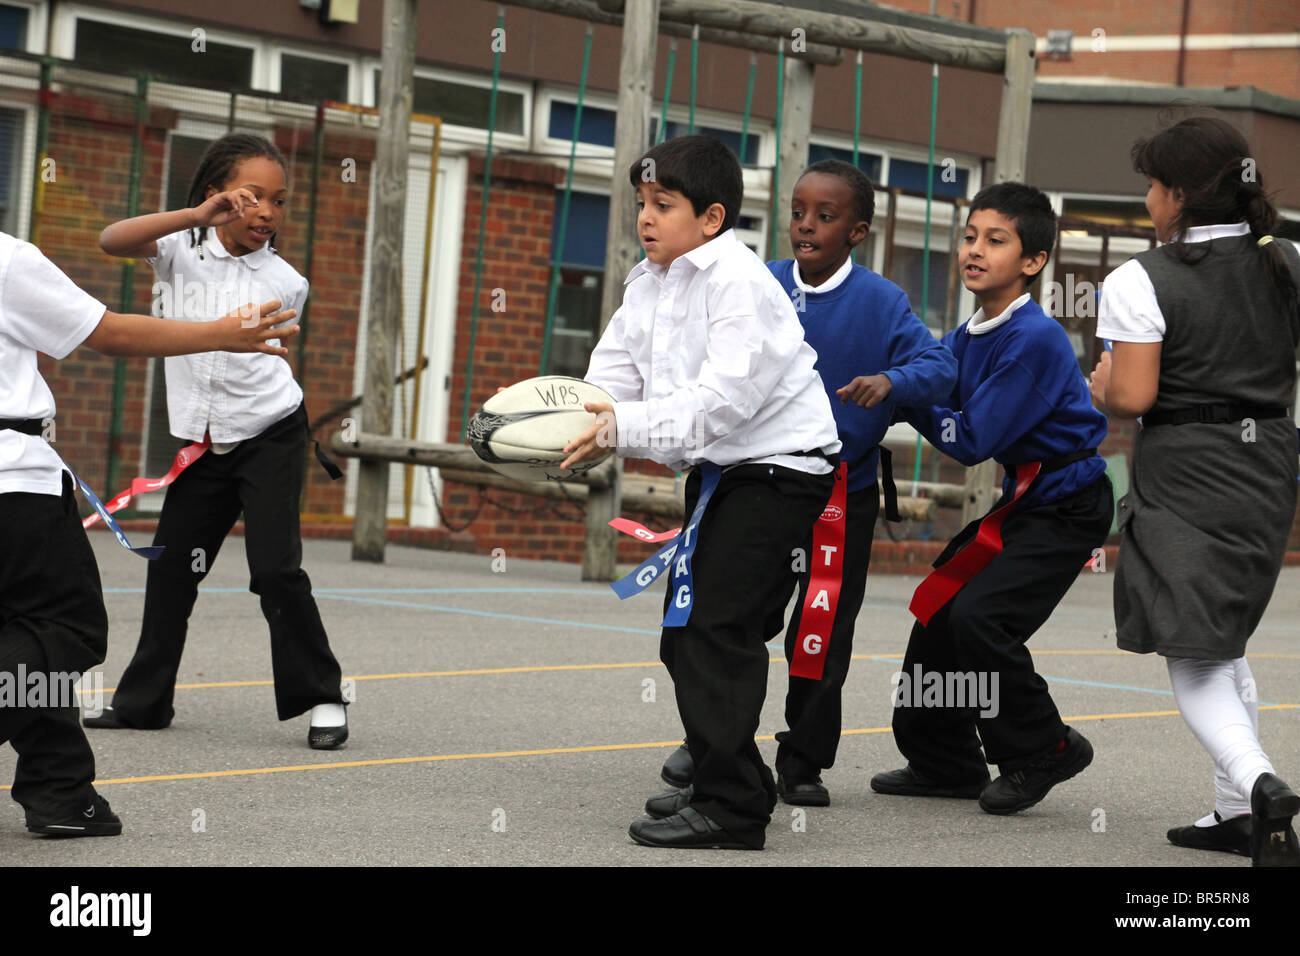 School children play tag rugby or flag rugby. They are 10 years old from year 6. Stock Photo